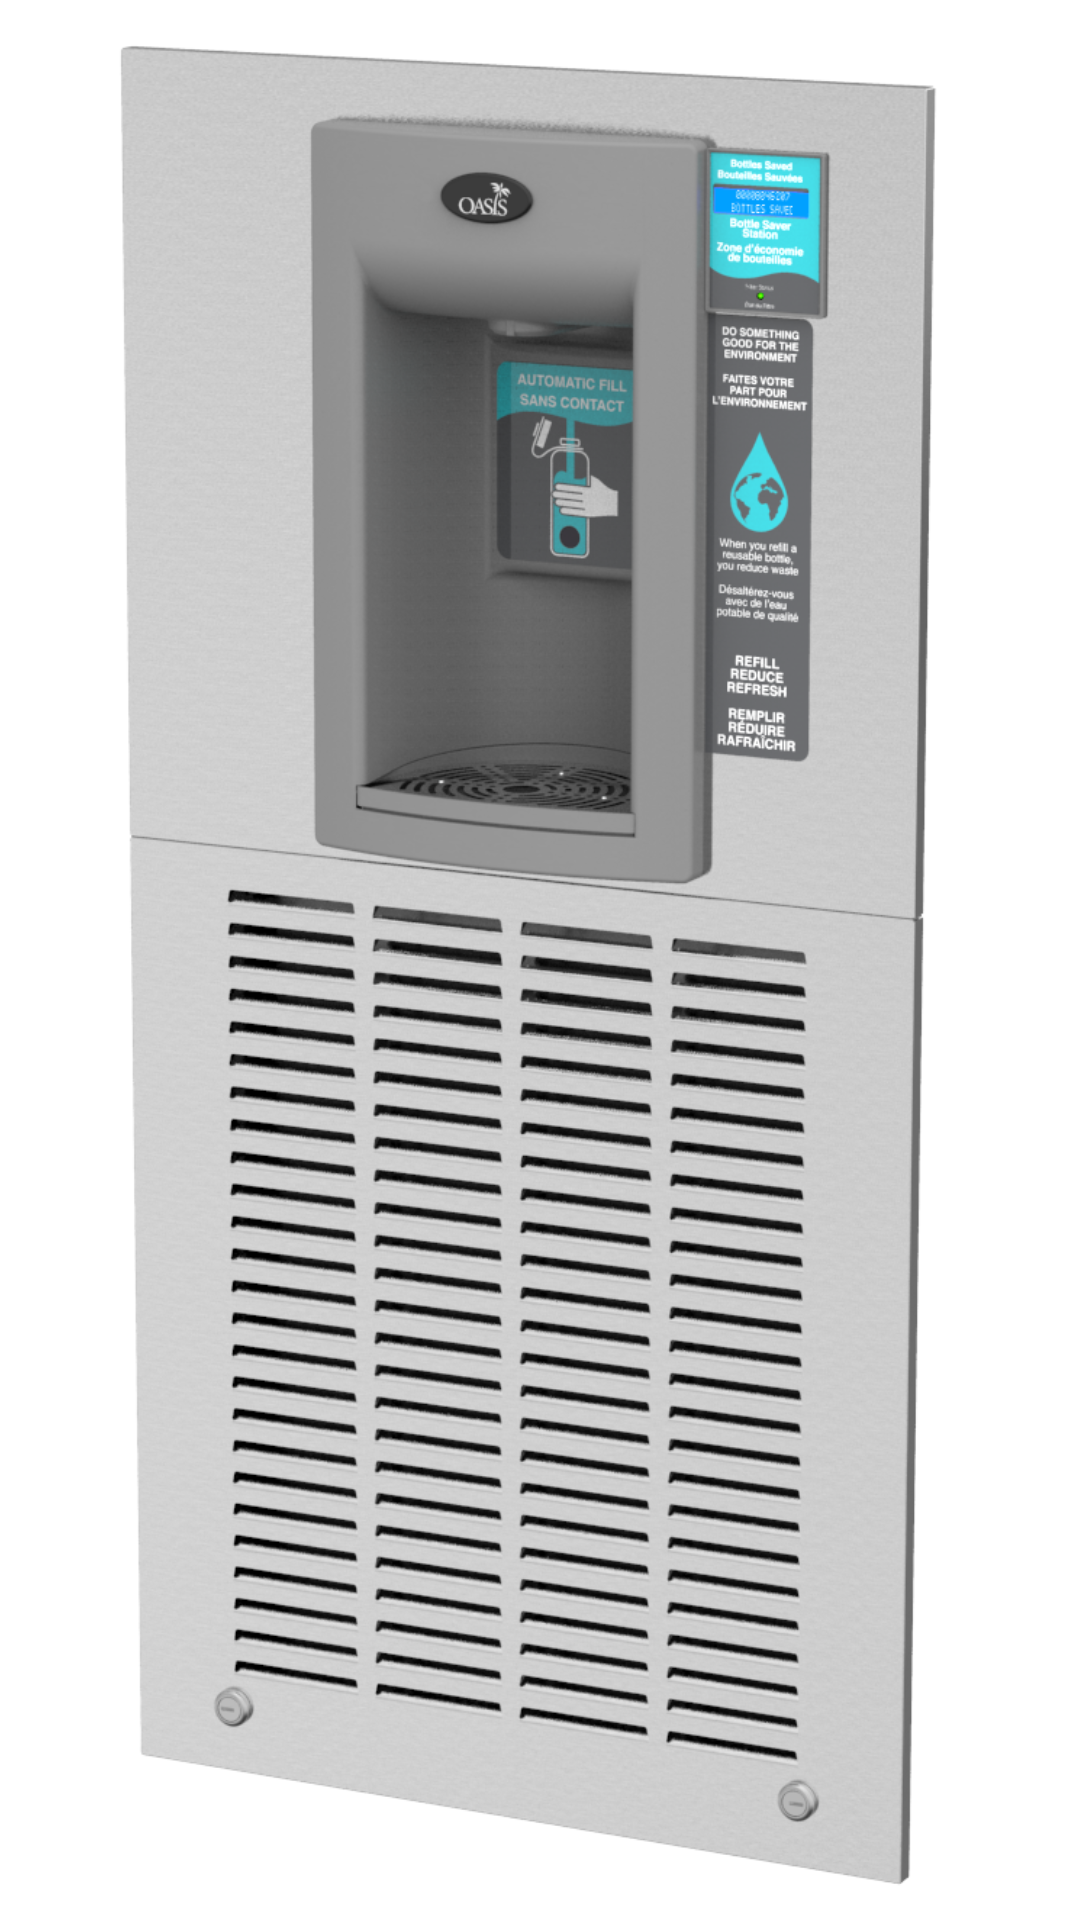 Wall-Recessed Bottle Public water filling station